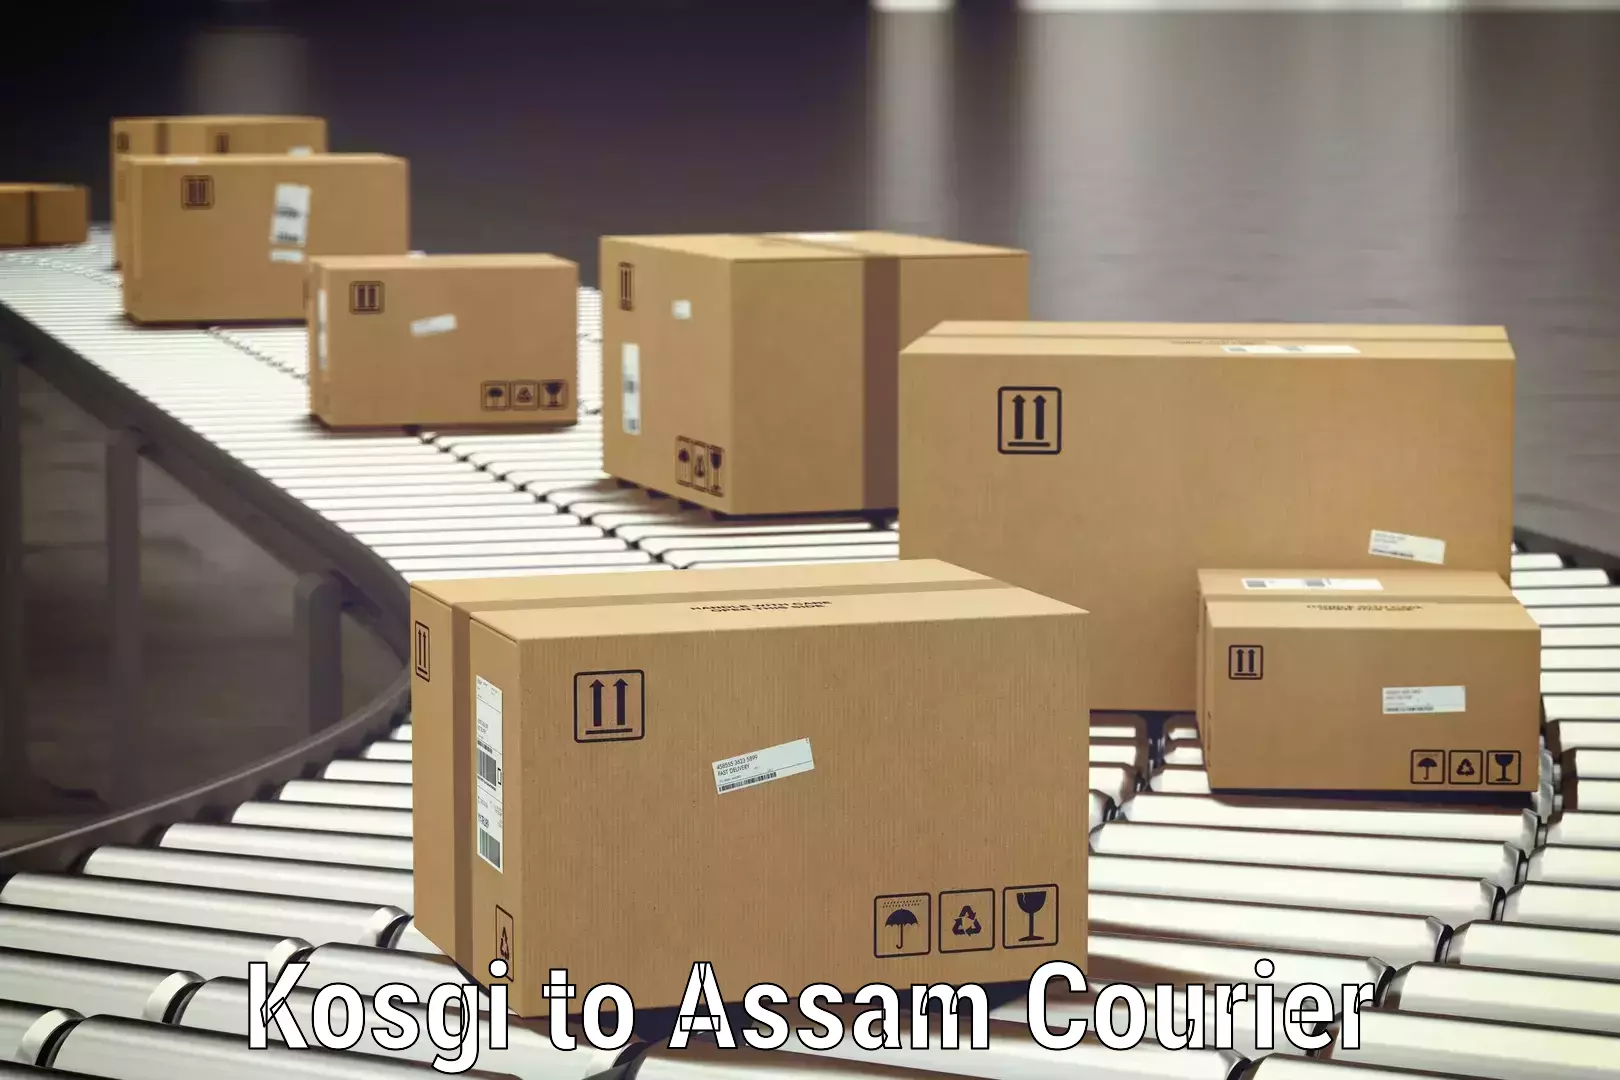 Luggage delivery system Kosgi to Assam